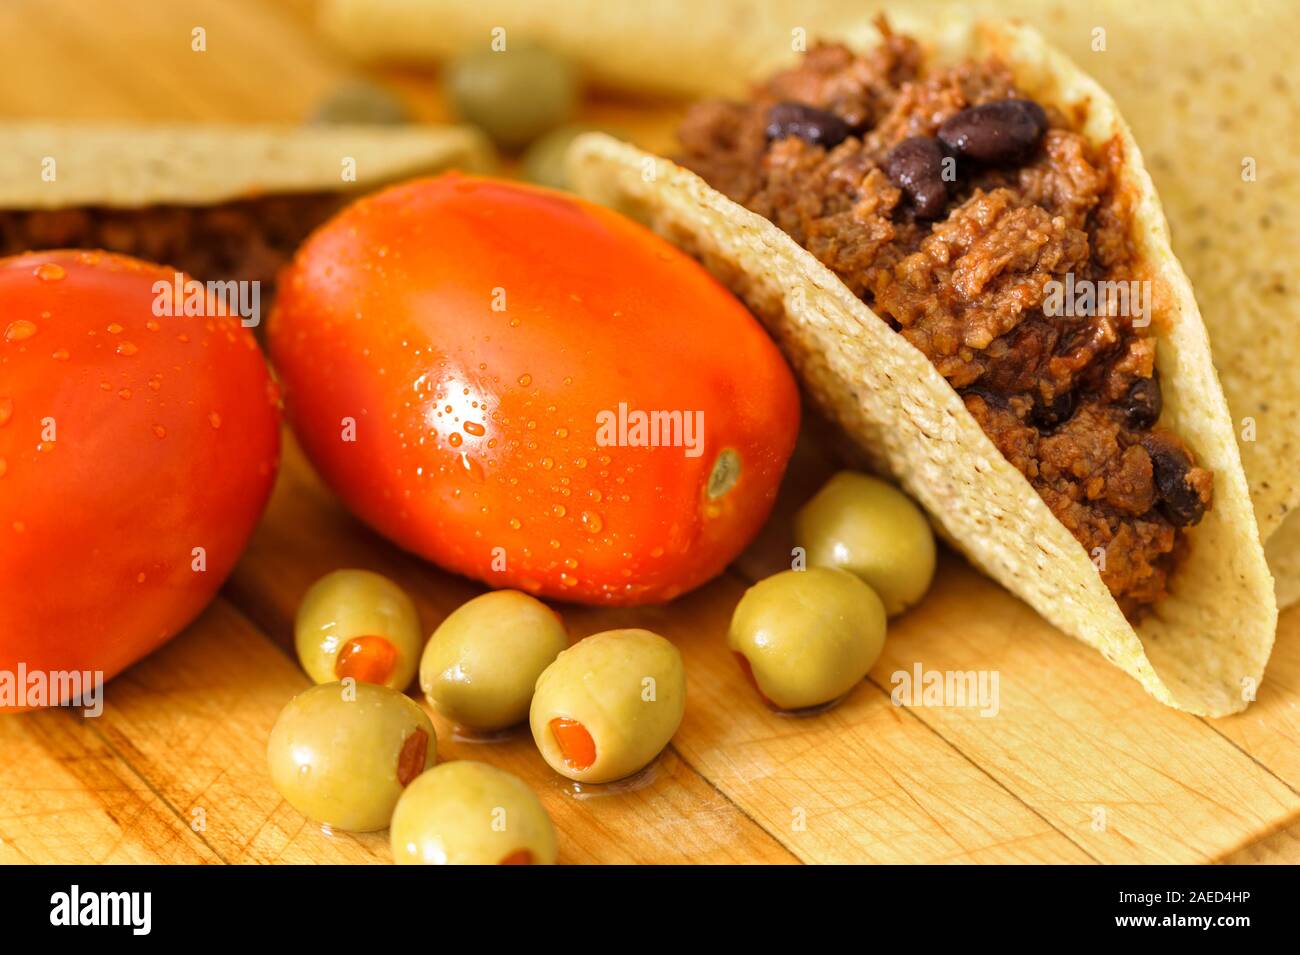 Fresh taco ingredients red ripe plum tomatoes, green olives and beef tacos with black beans in taco shells on a wooden cutting board. Stock Photo